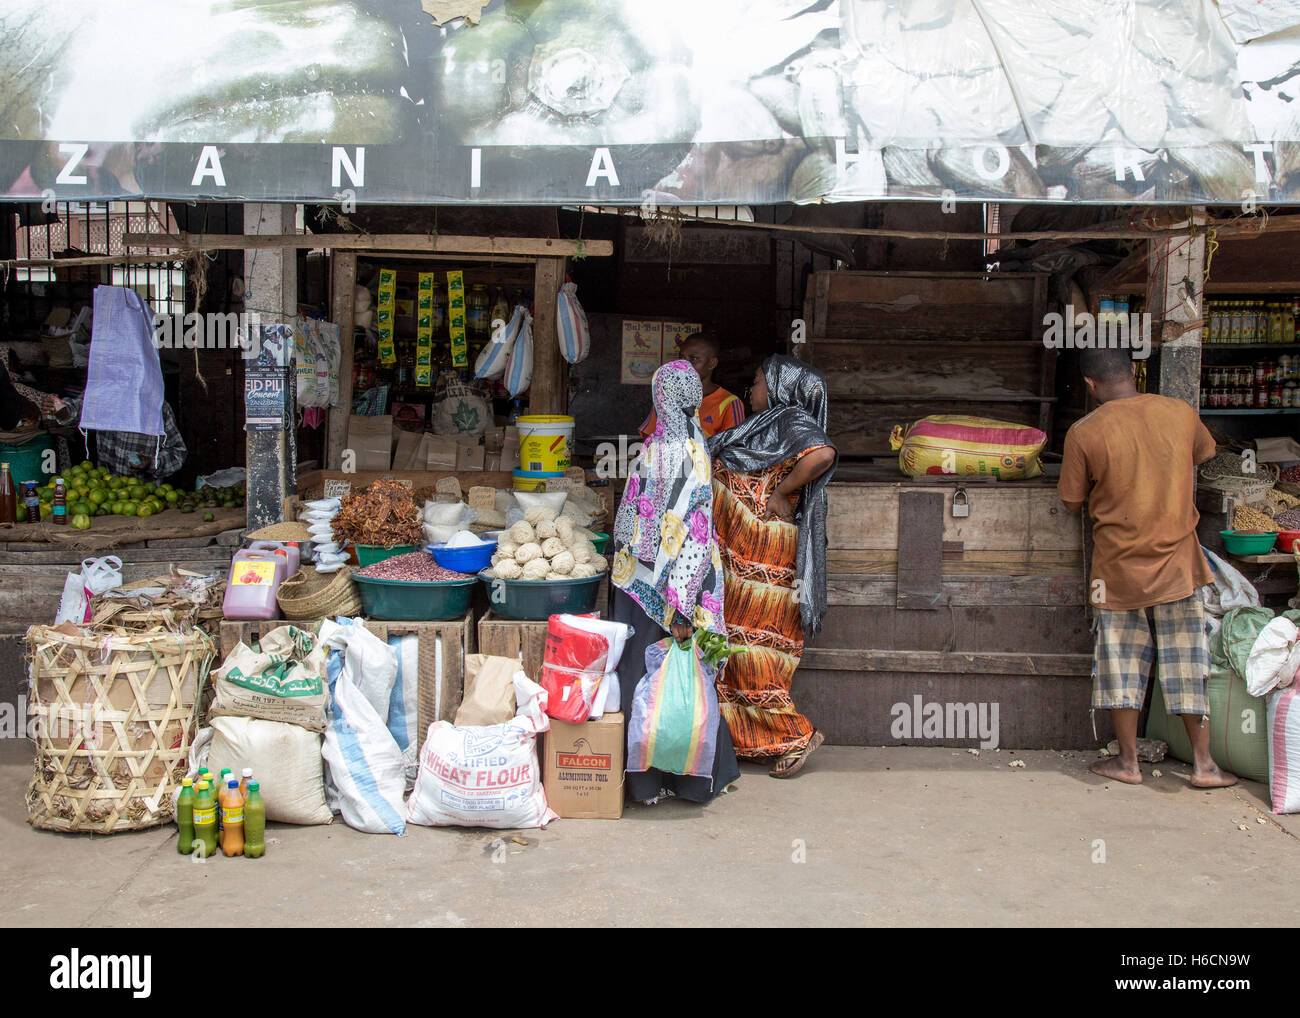 A variety of colourful produce for sale in the market in Stonetown, Zanzibar Stock Photo